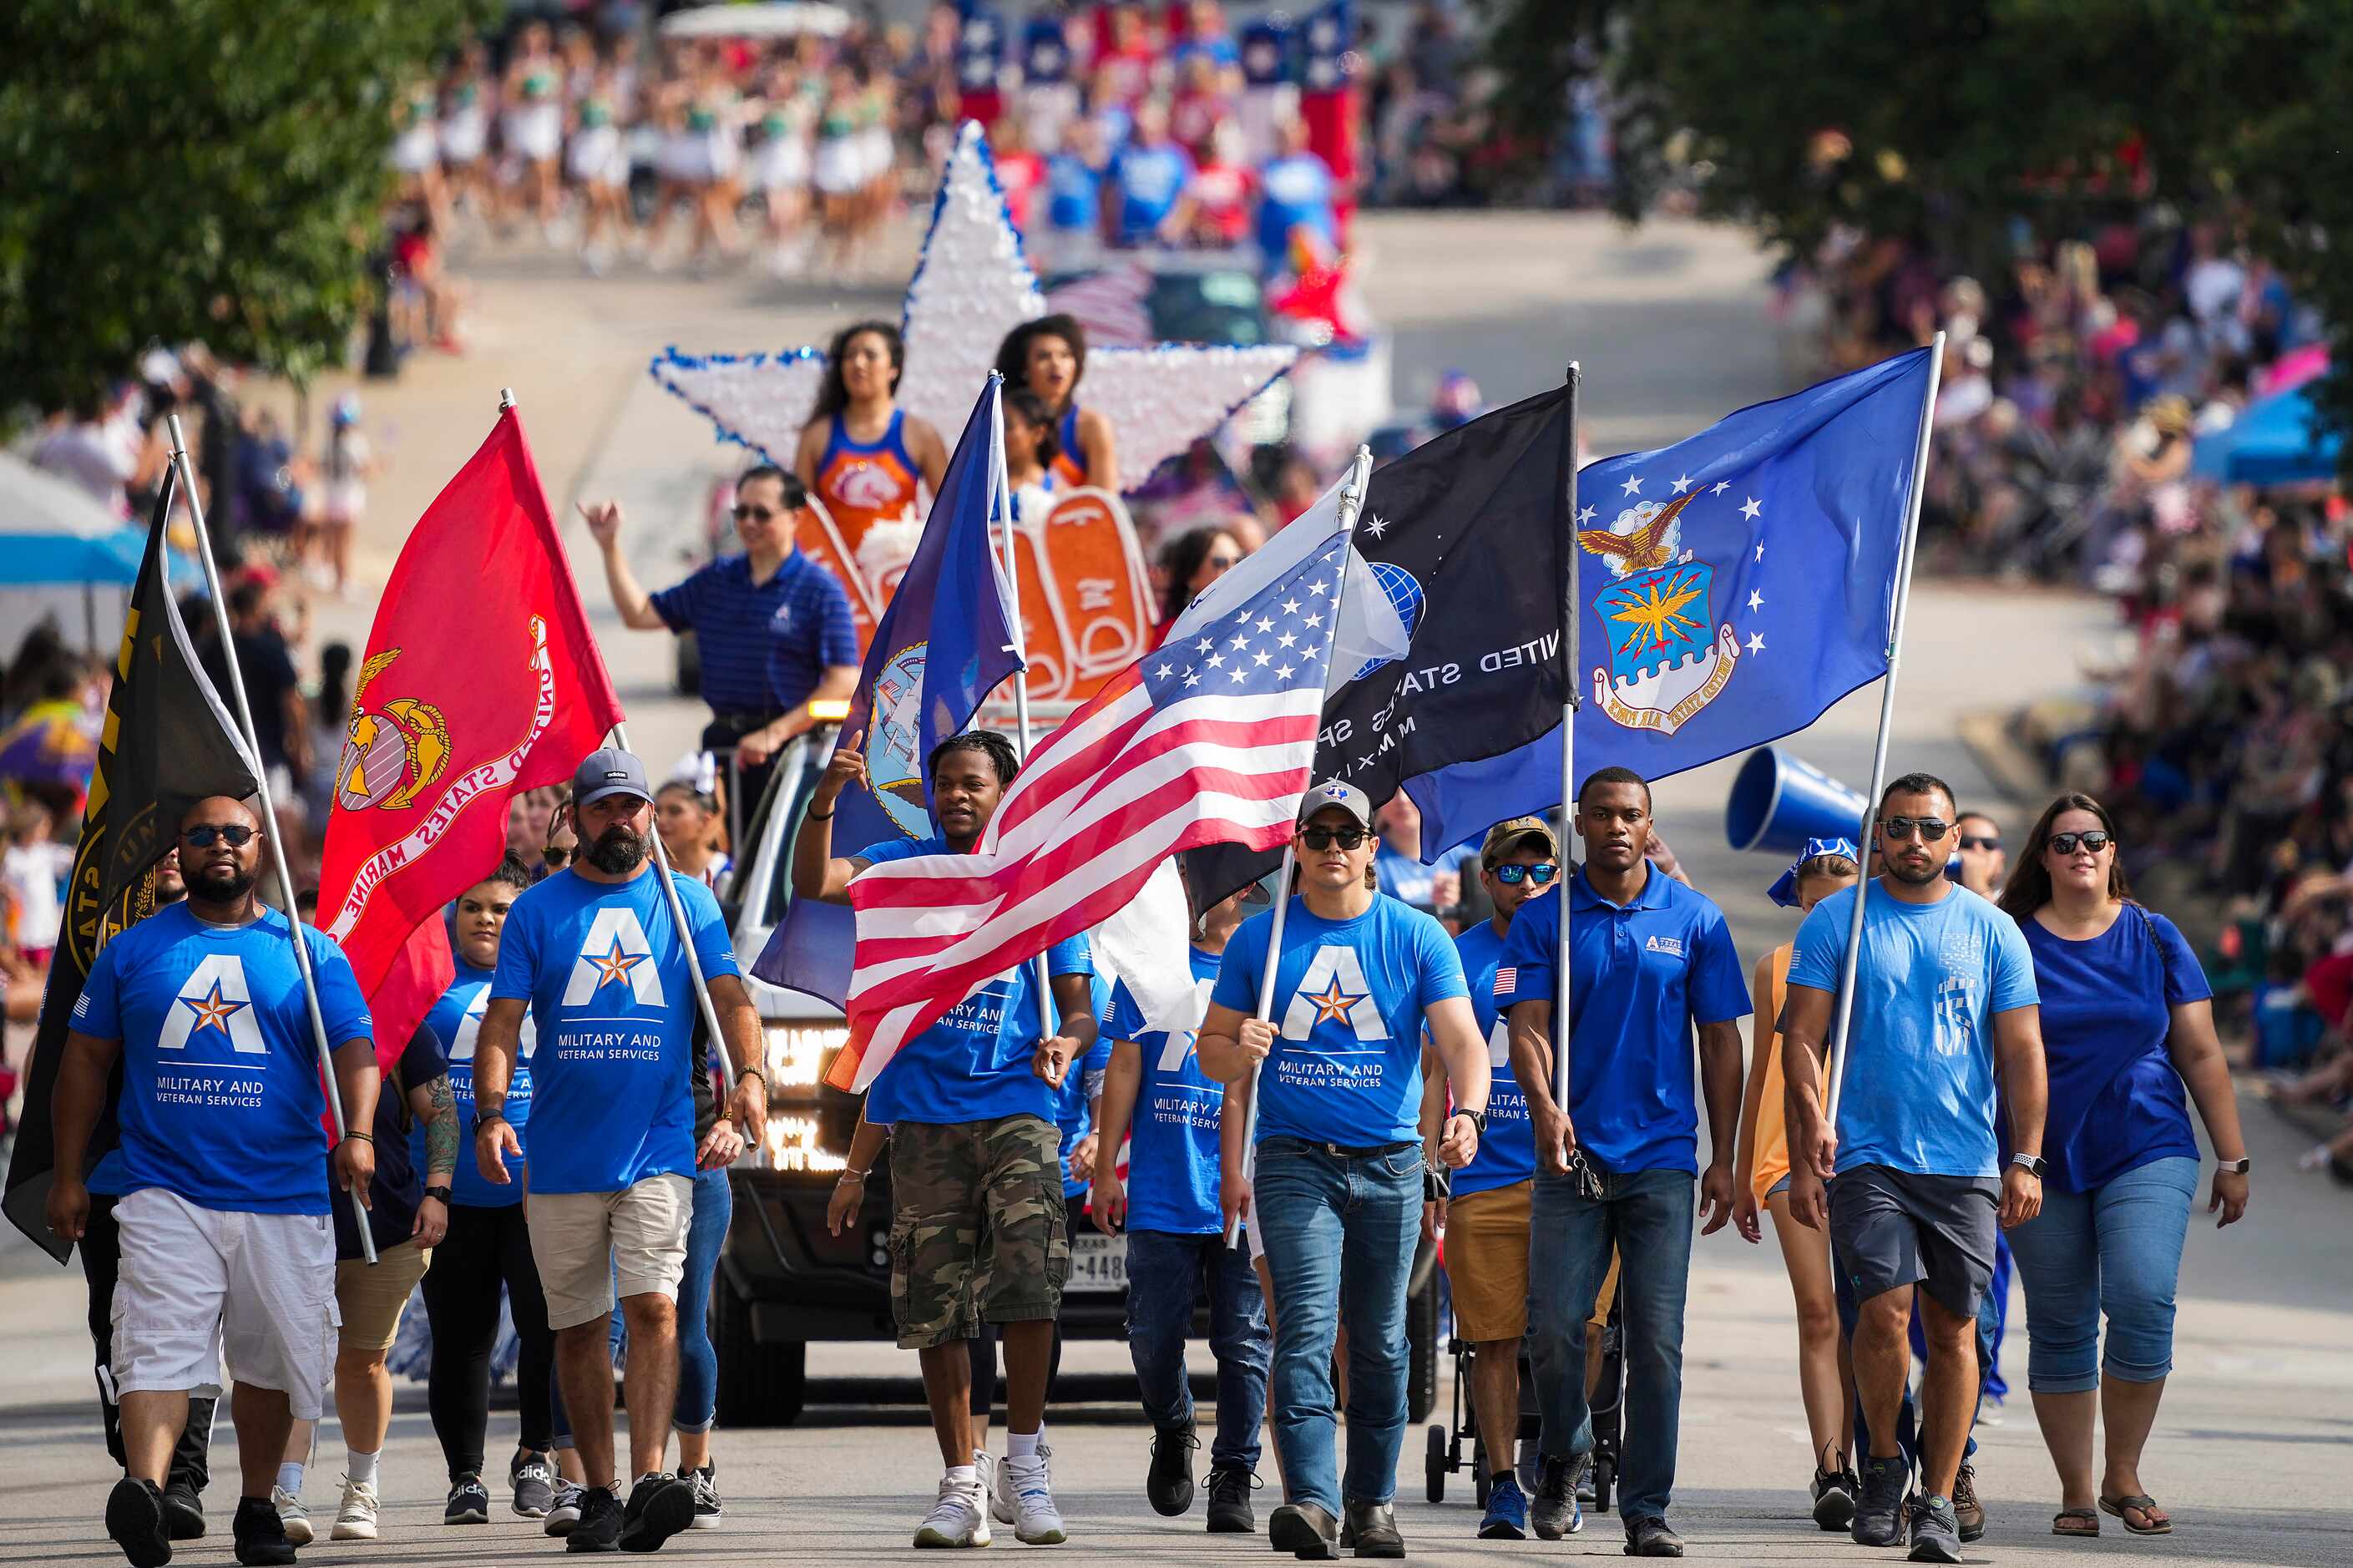 Representatives of UTA Military and Veterans Services carry the colors as they lead the...